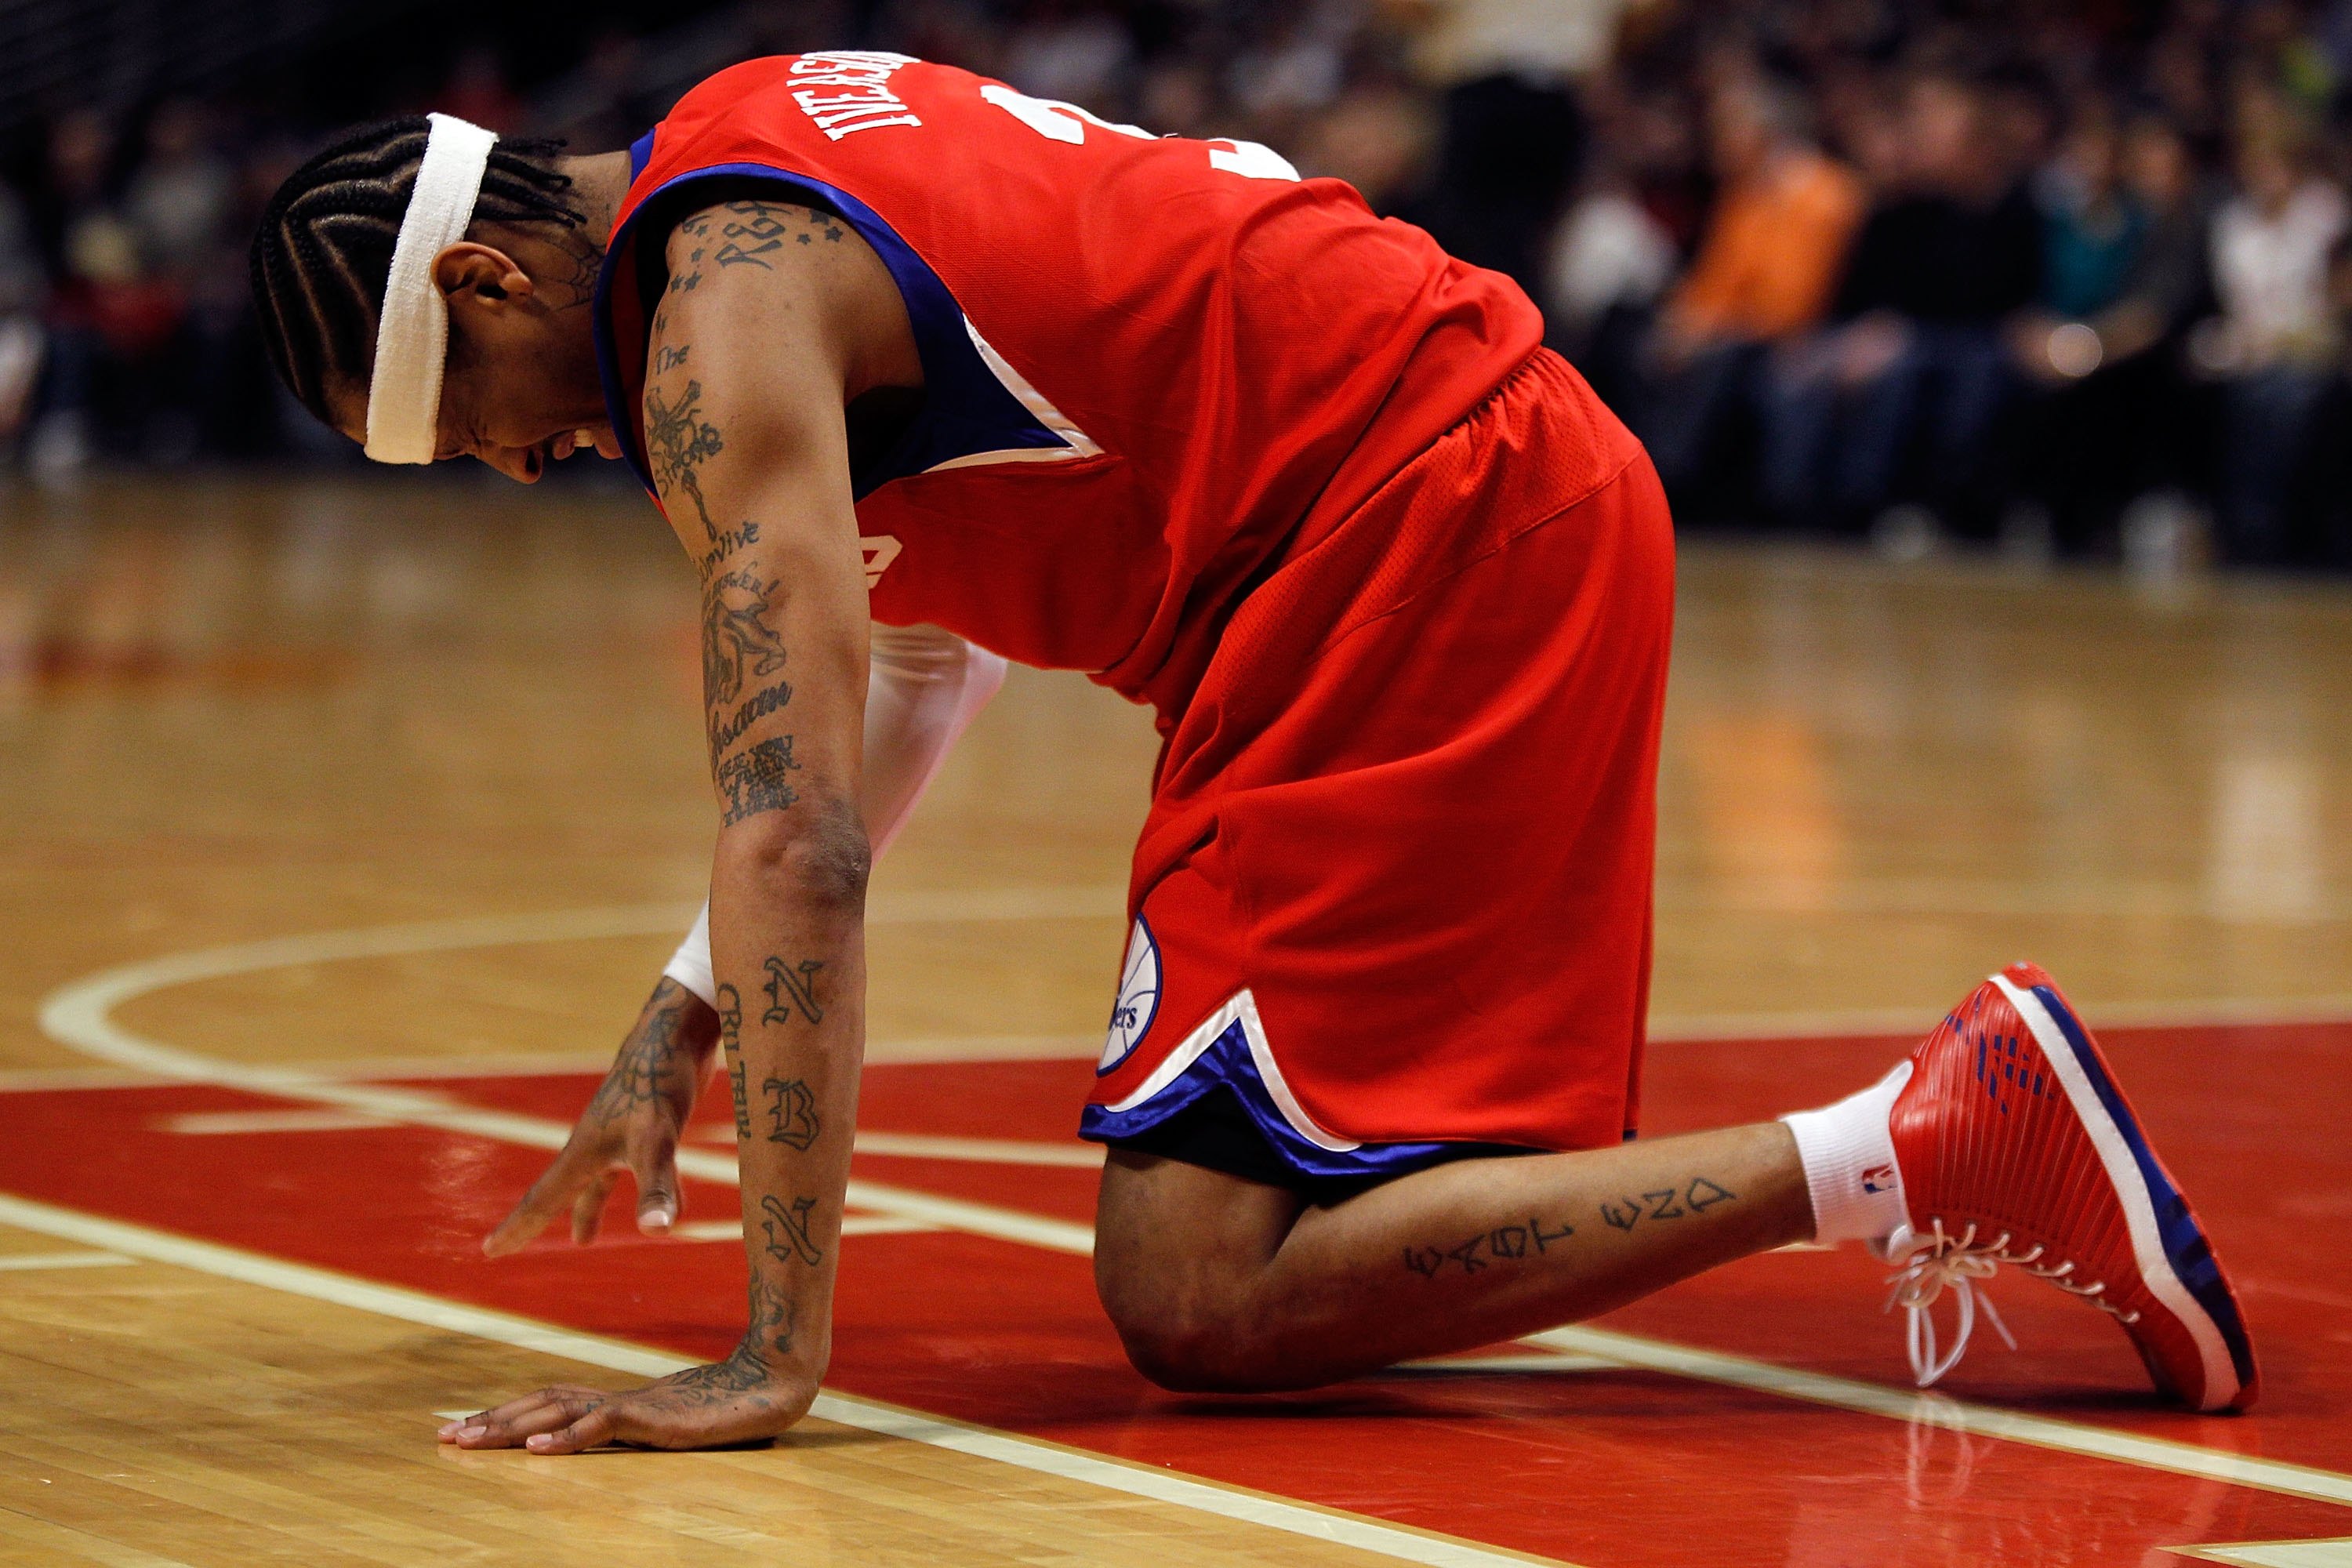 76ers' Iverson sidelined with arthritis in knee